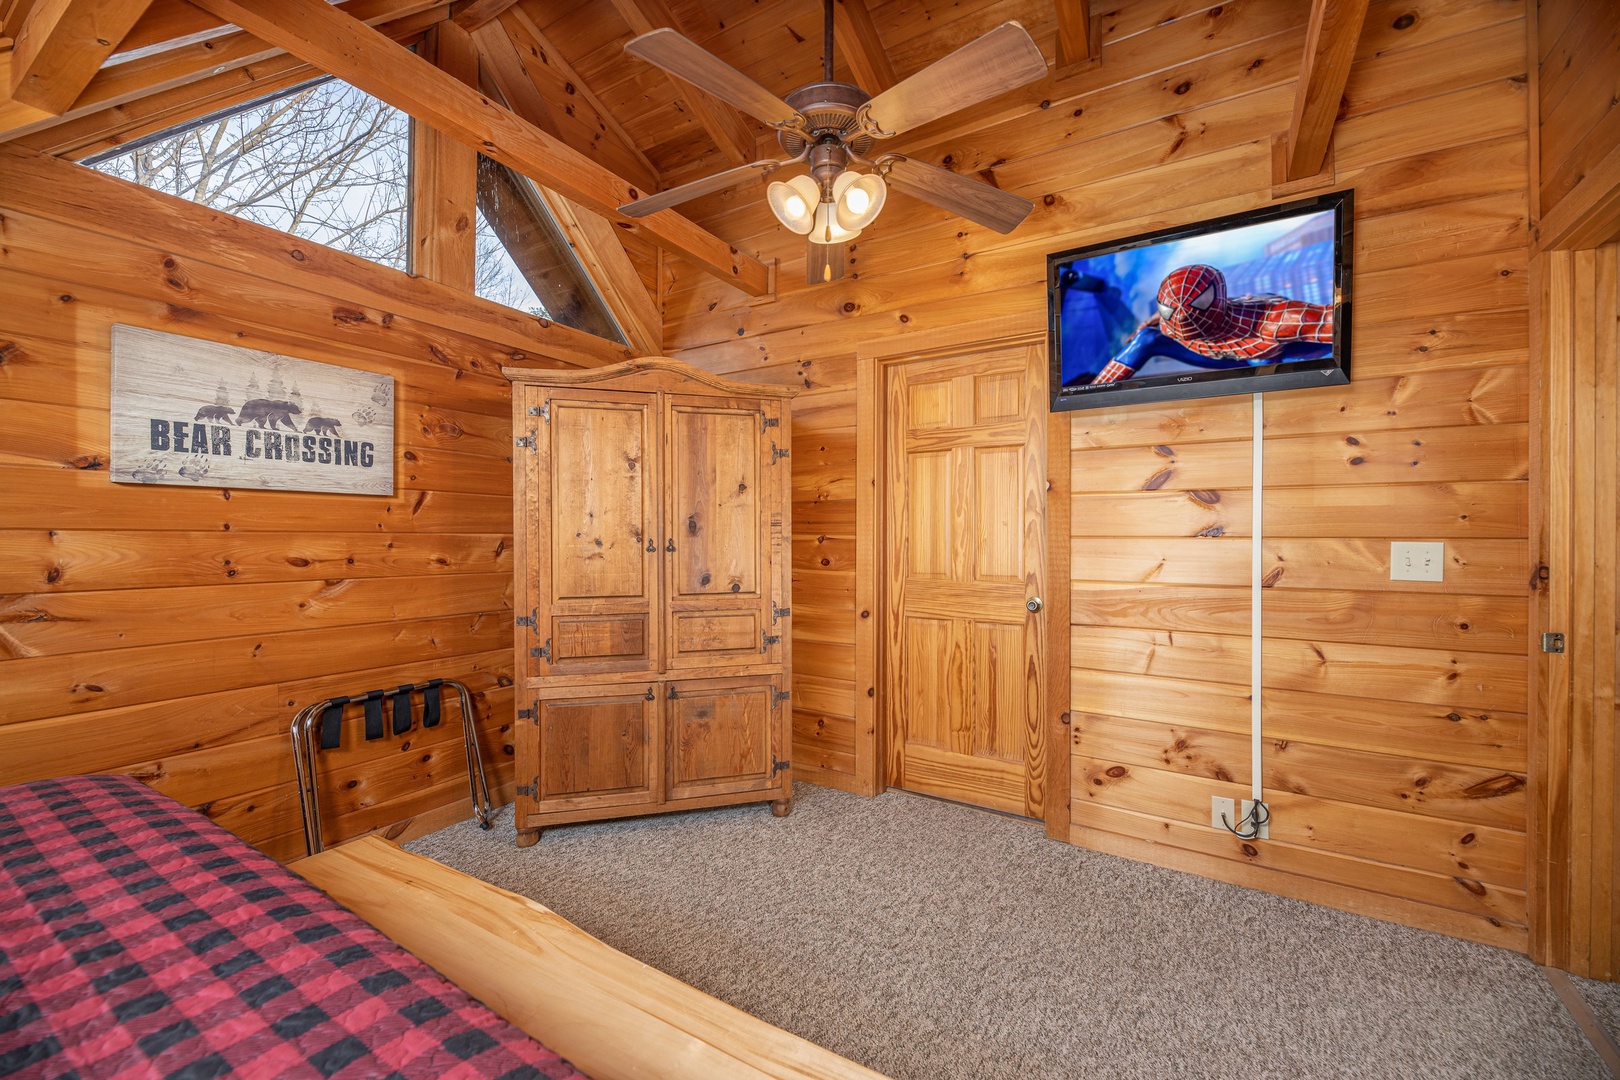 Armoire & TV in a bedroom at Livin' Simple, a 2 bedroom cabin rental located in Pigeon Forge